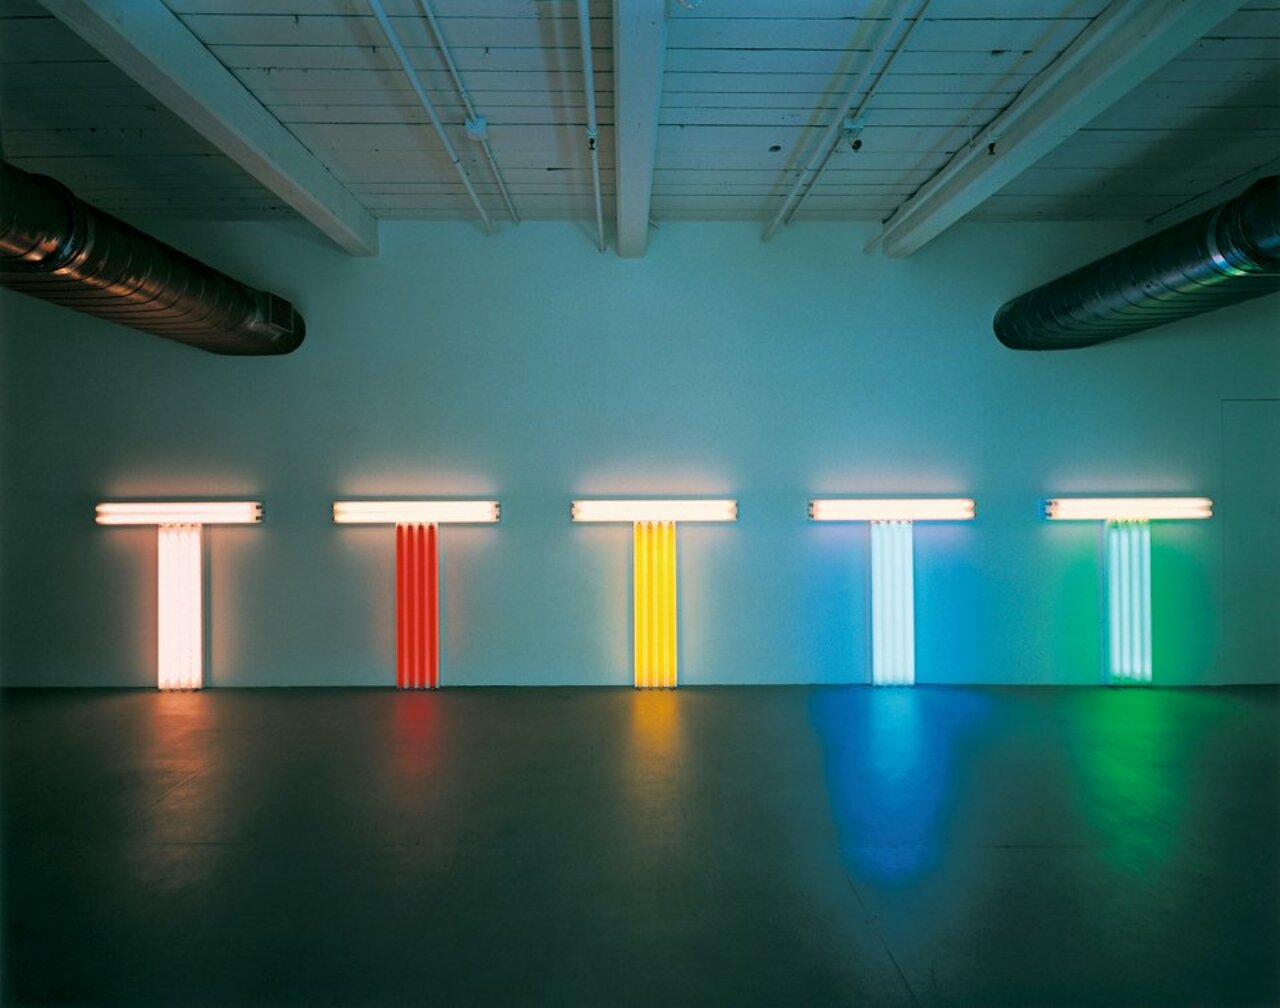 We take a look at Dan Flavin's latest exhibition @ikongallery in the current issue #lightart http://www.aestheticamagazine.com https://t.co/WaFrBXa2PD